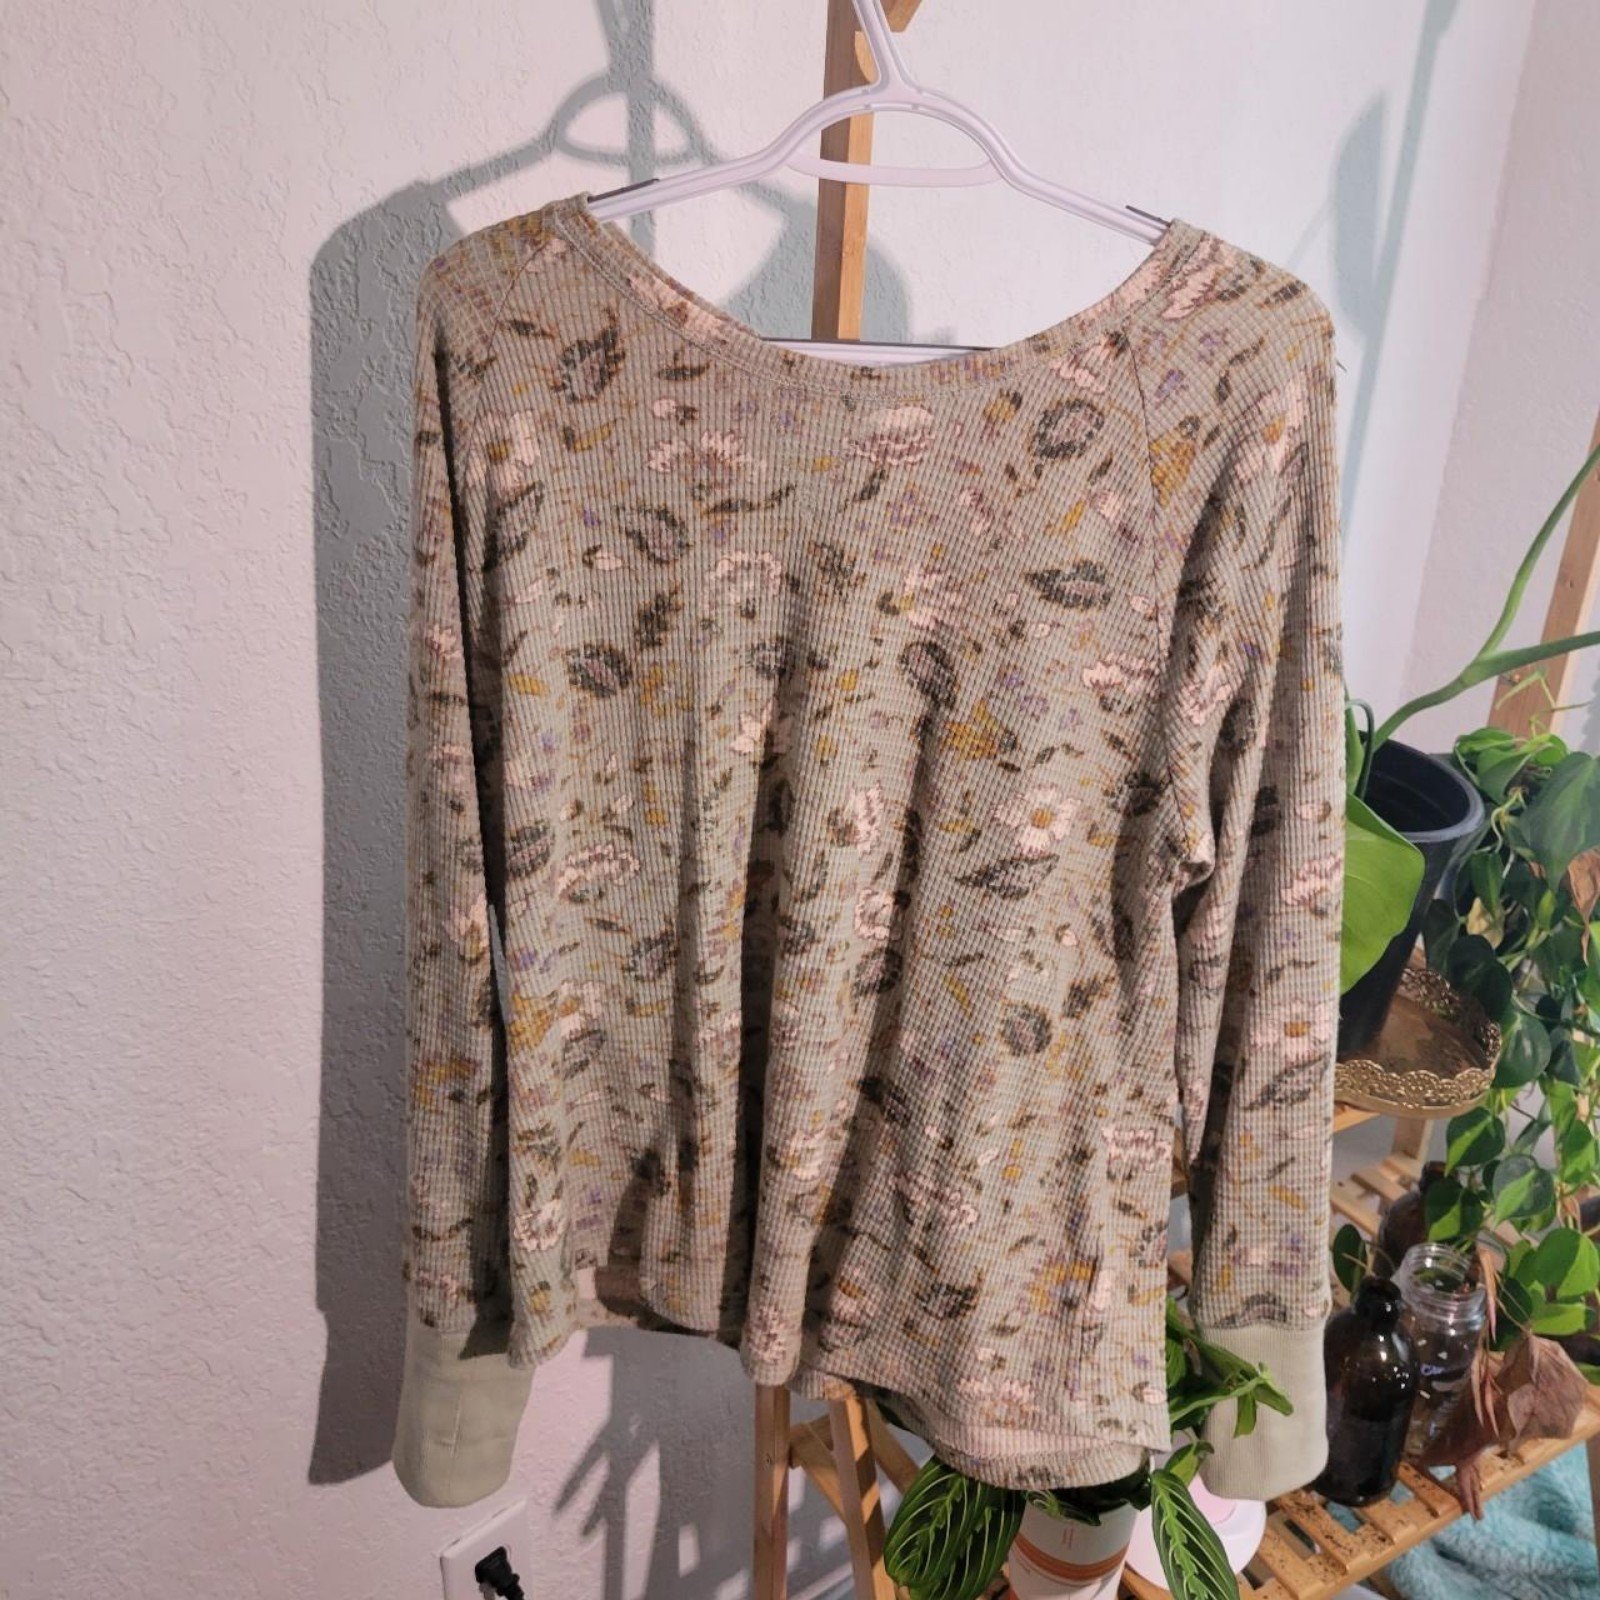 Discounted Light green floral thermal style top fJJsltUwu Zero Profit 